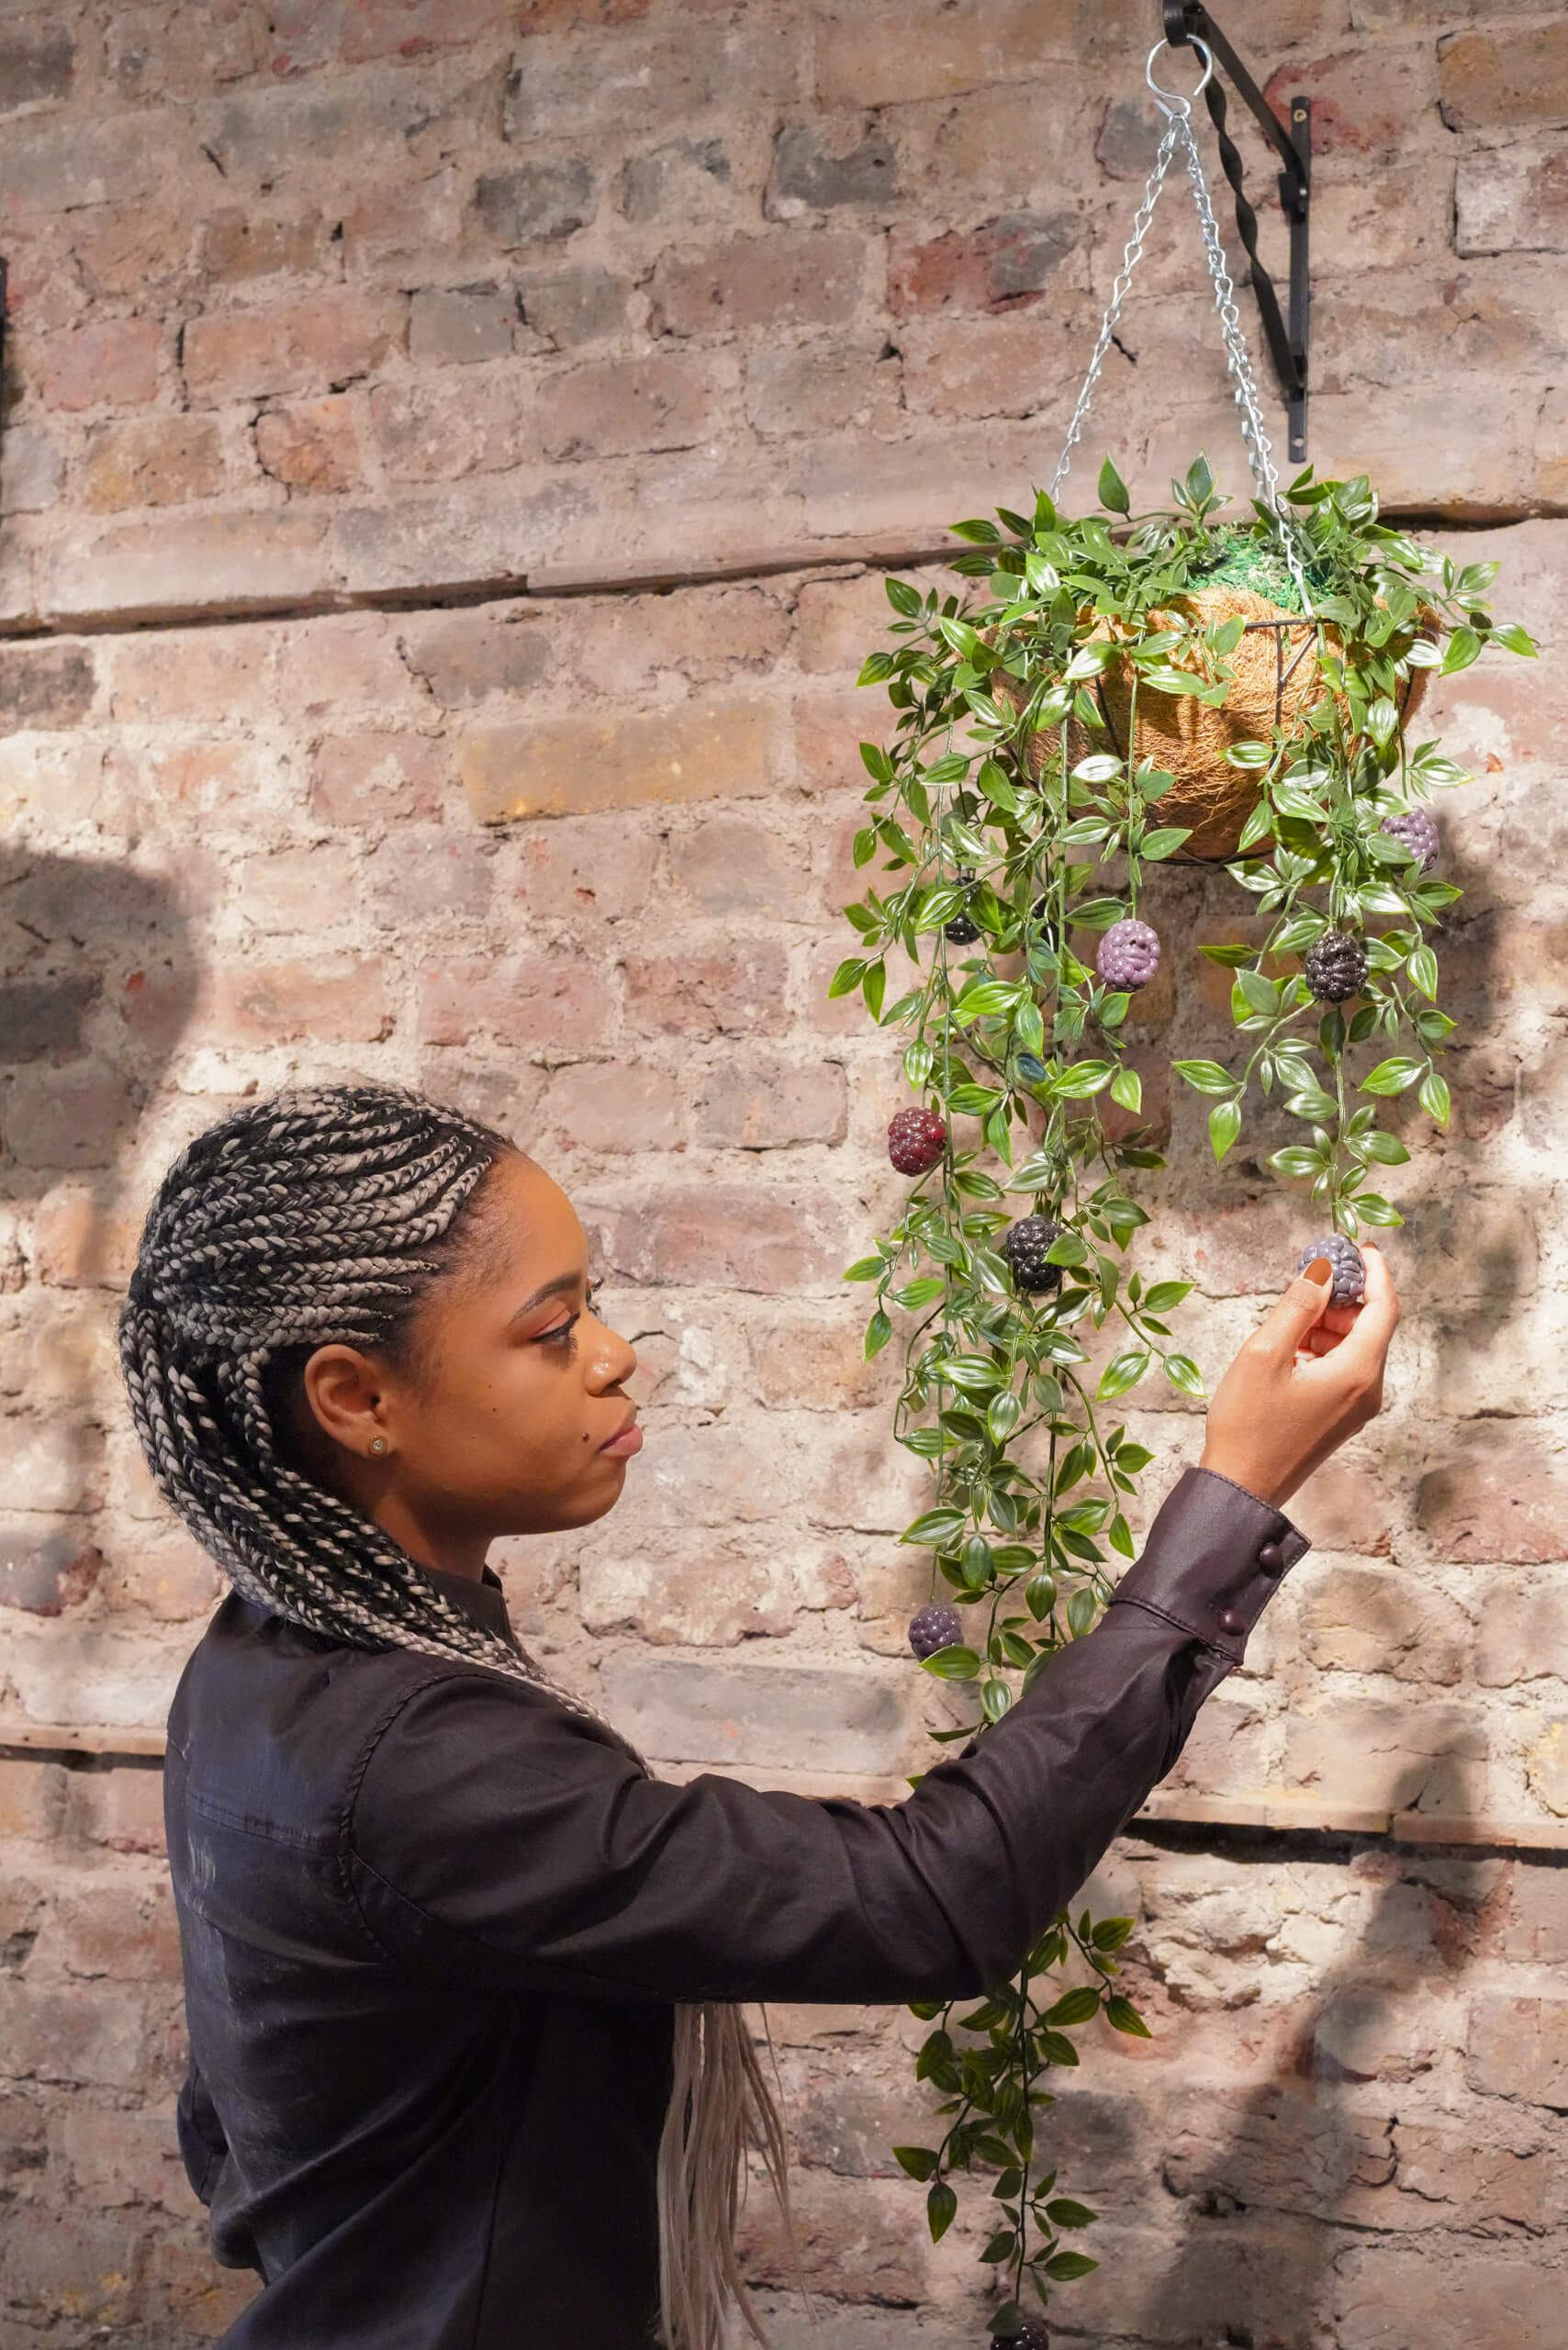 Lauren Marie Haywood beside some of her handmade plant artwork mounted on a brick wall